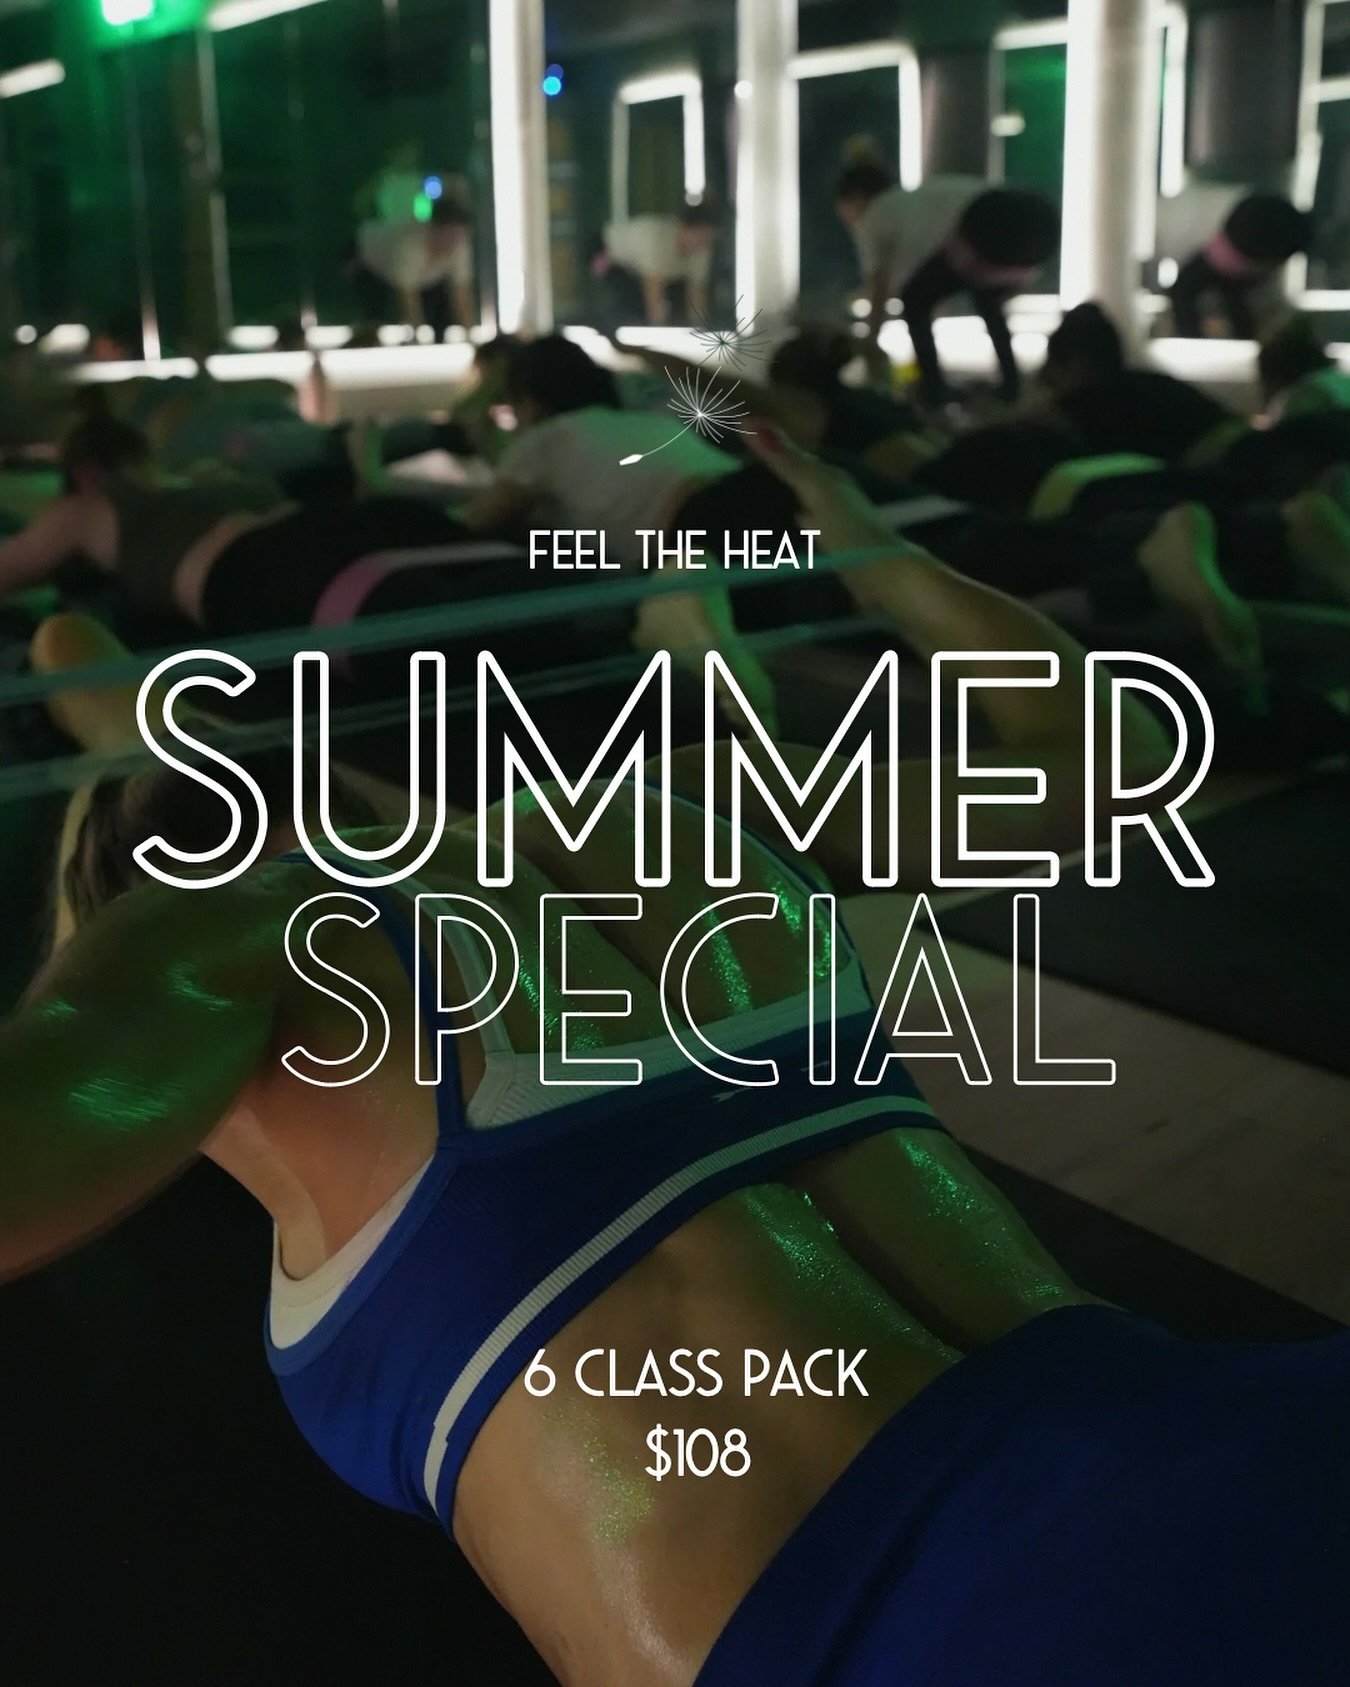 Summer is almost here, and so is our Summer Special! 🥵 Get ready for 6 classes at just $108, and kickstart your fitness journey. Plus, turn this into your summer of transformation with a special discount on your first month of VIP membership. 🌞🧘&z